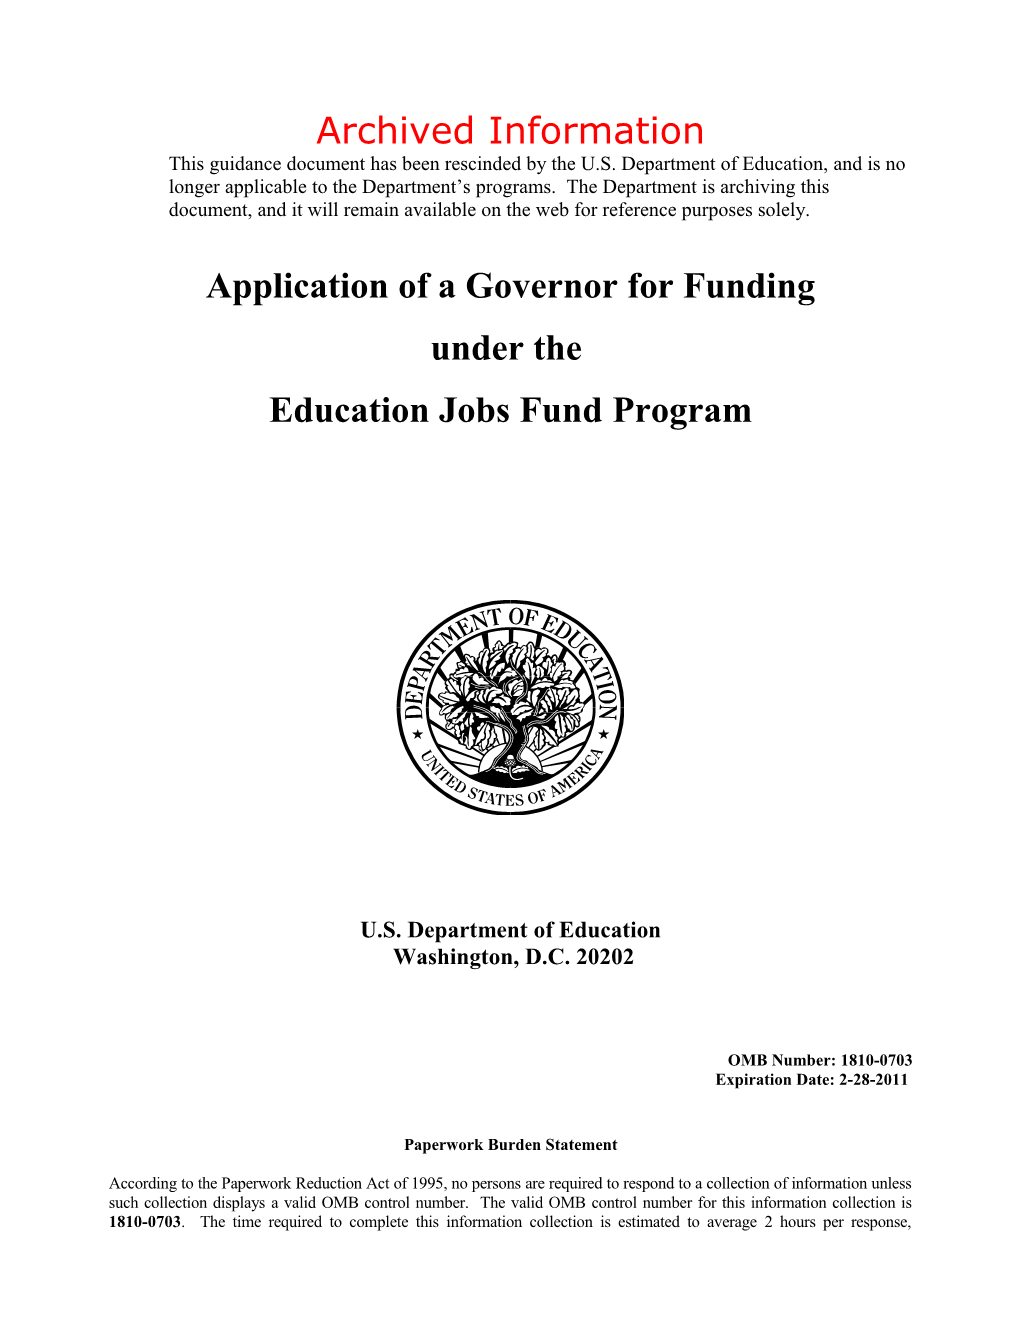 Archived: Application of a Governor for Funding Under the Education Jobs Fund Program (MS Word)